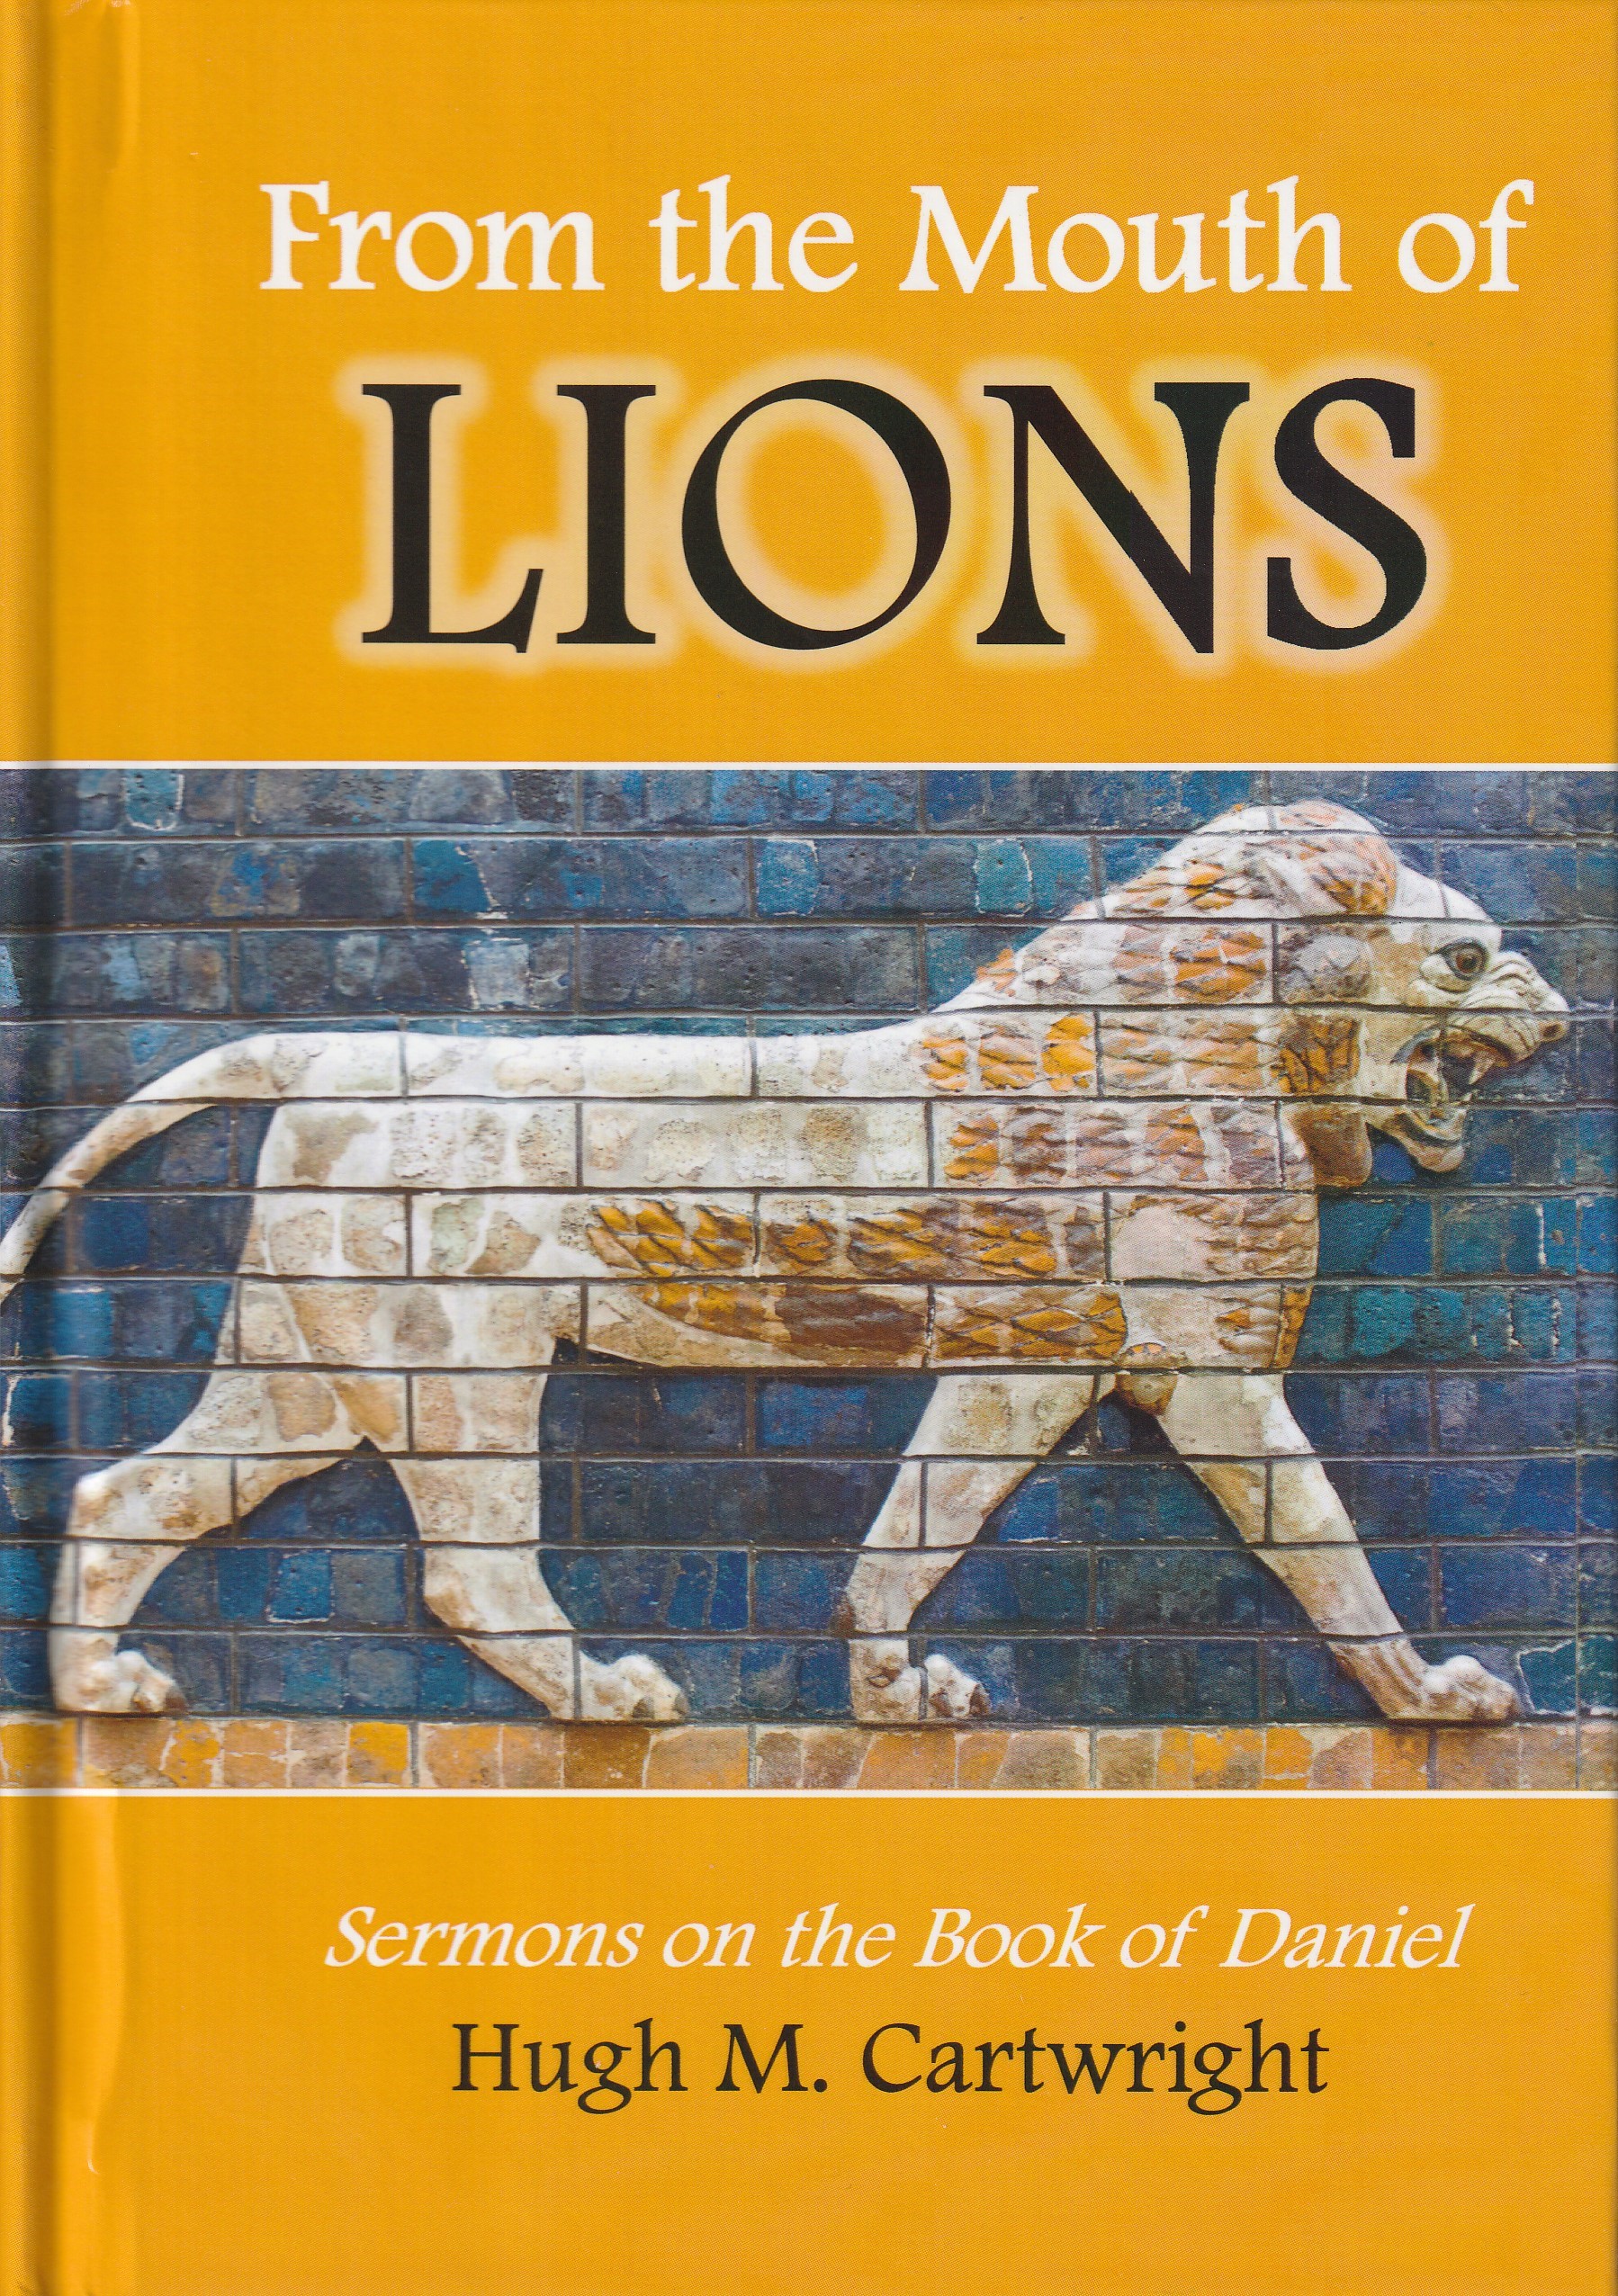 From the Mouth of Lions: Sermons on the Book of Daniel (hardback)